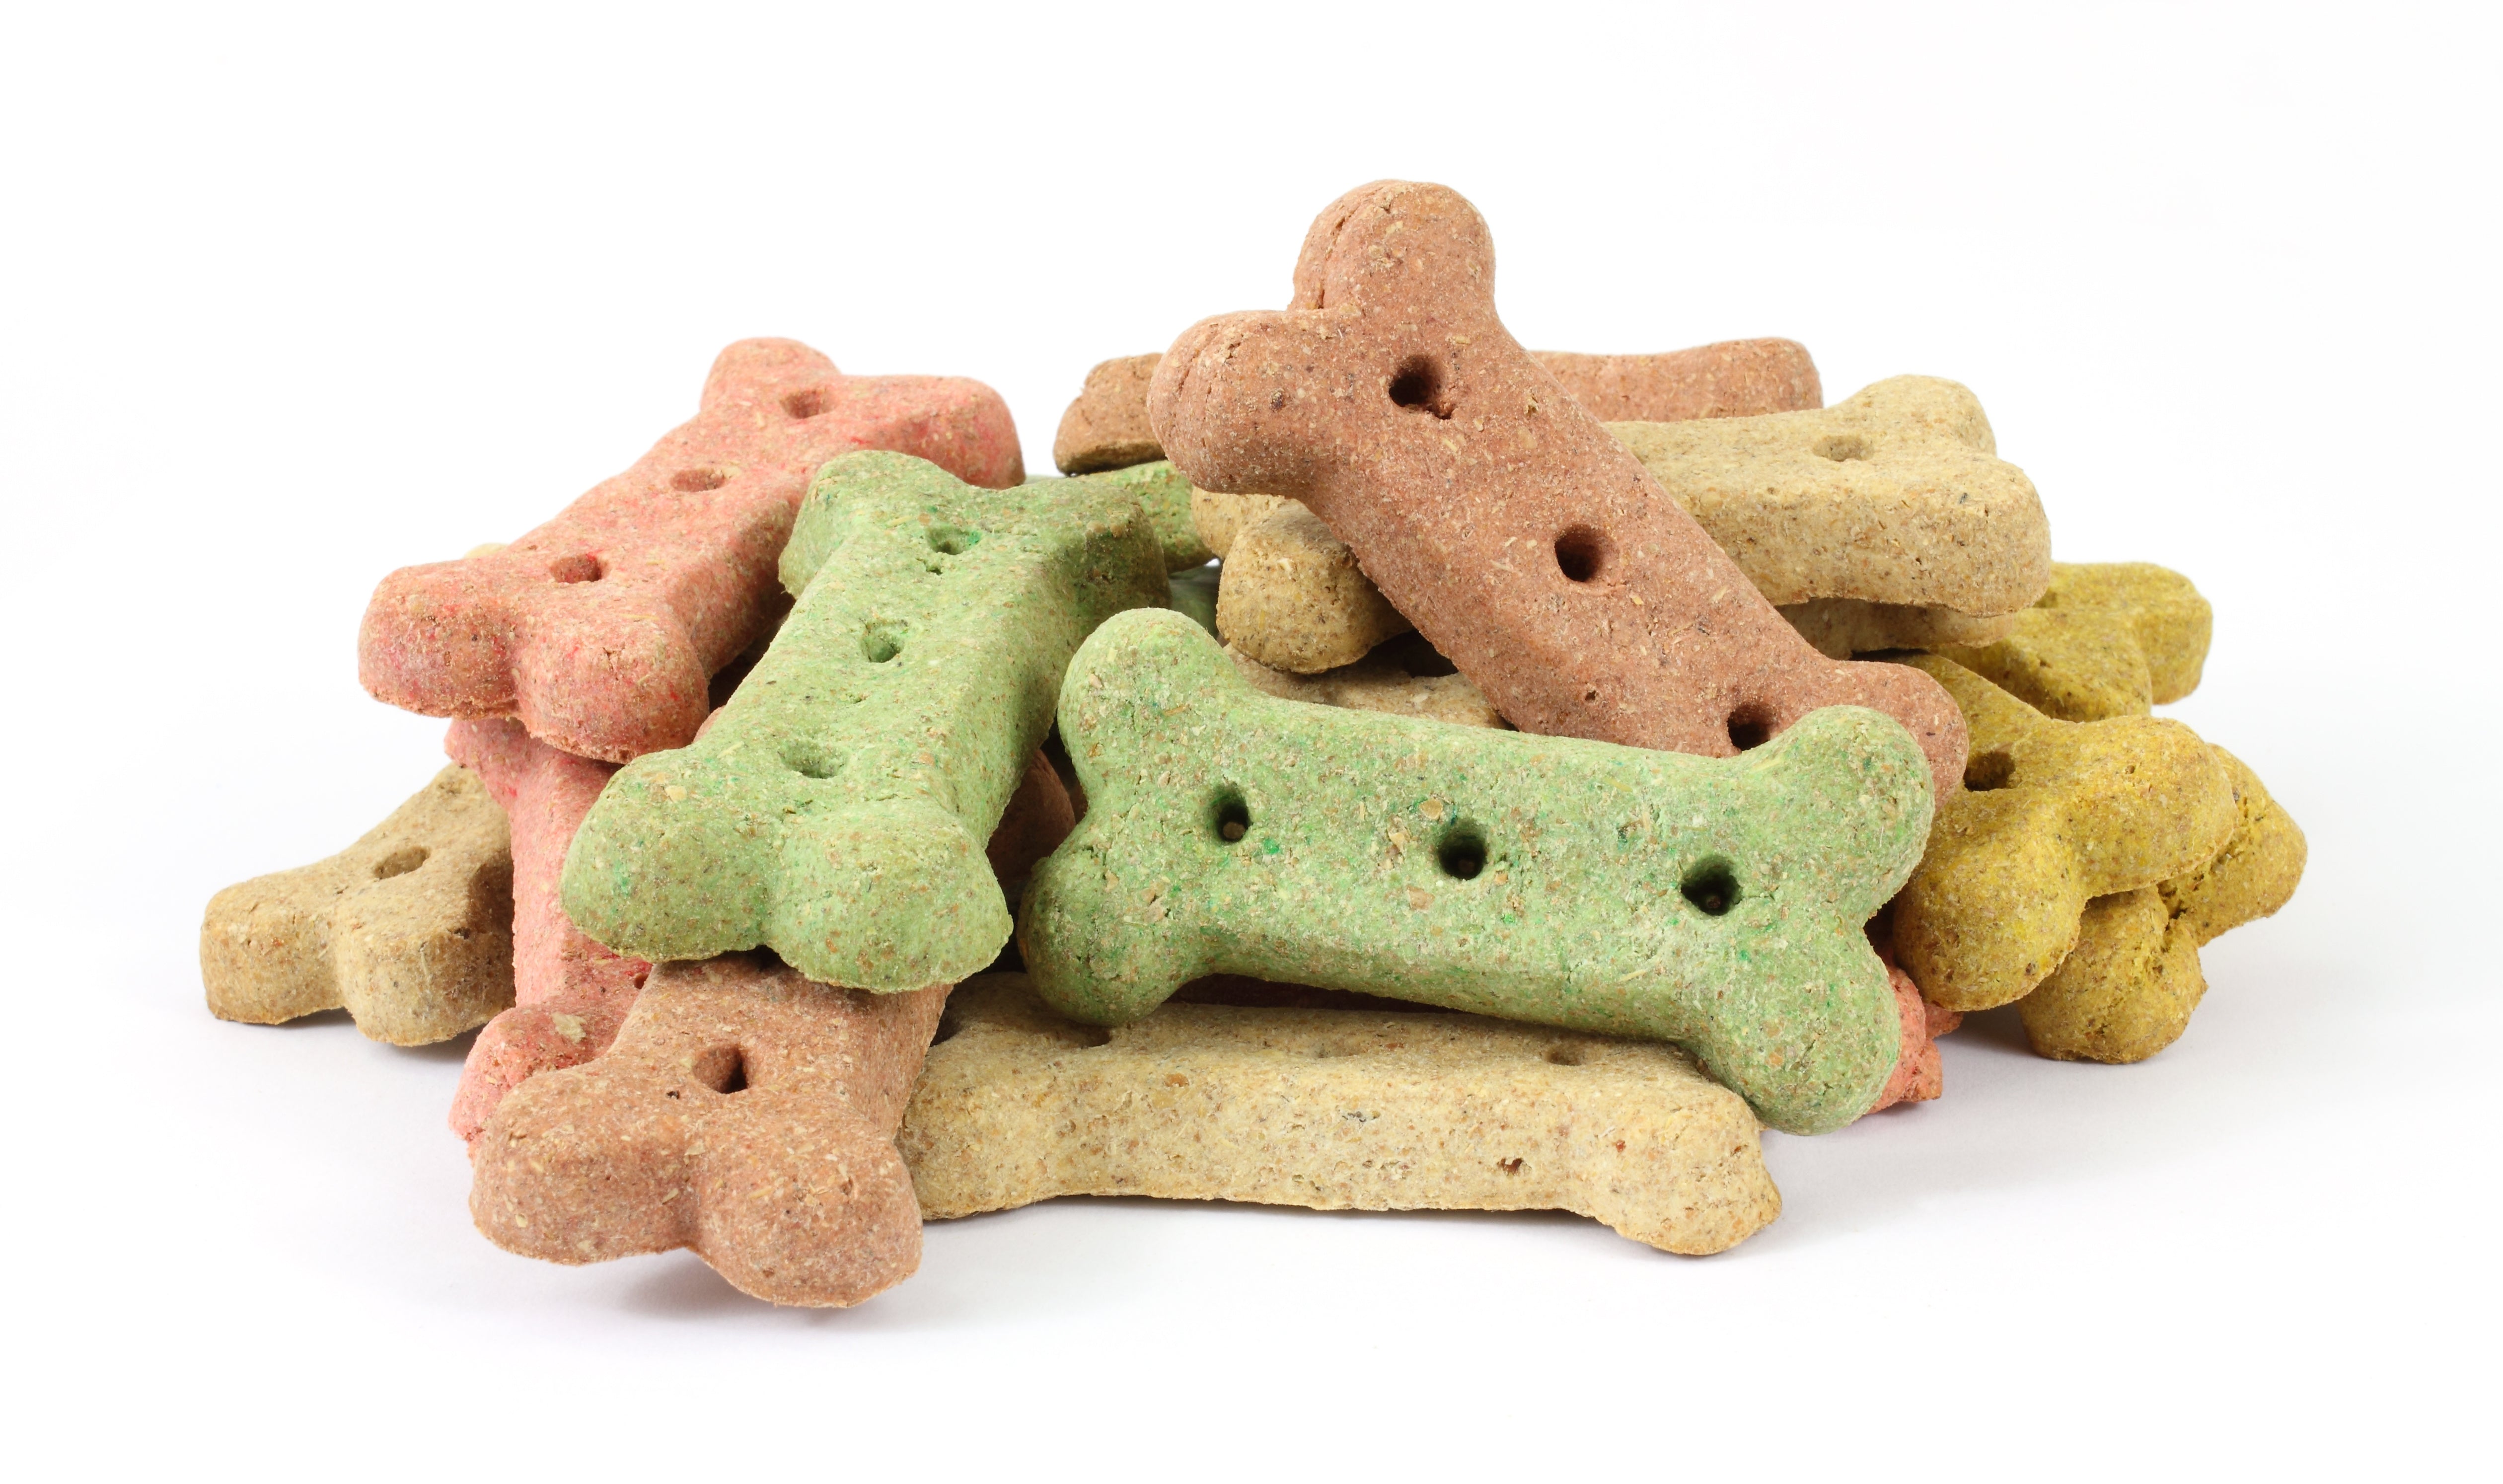 6 Healthy Treat Options for Dogs